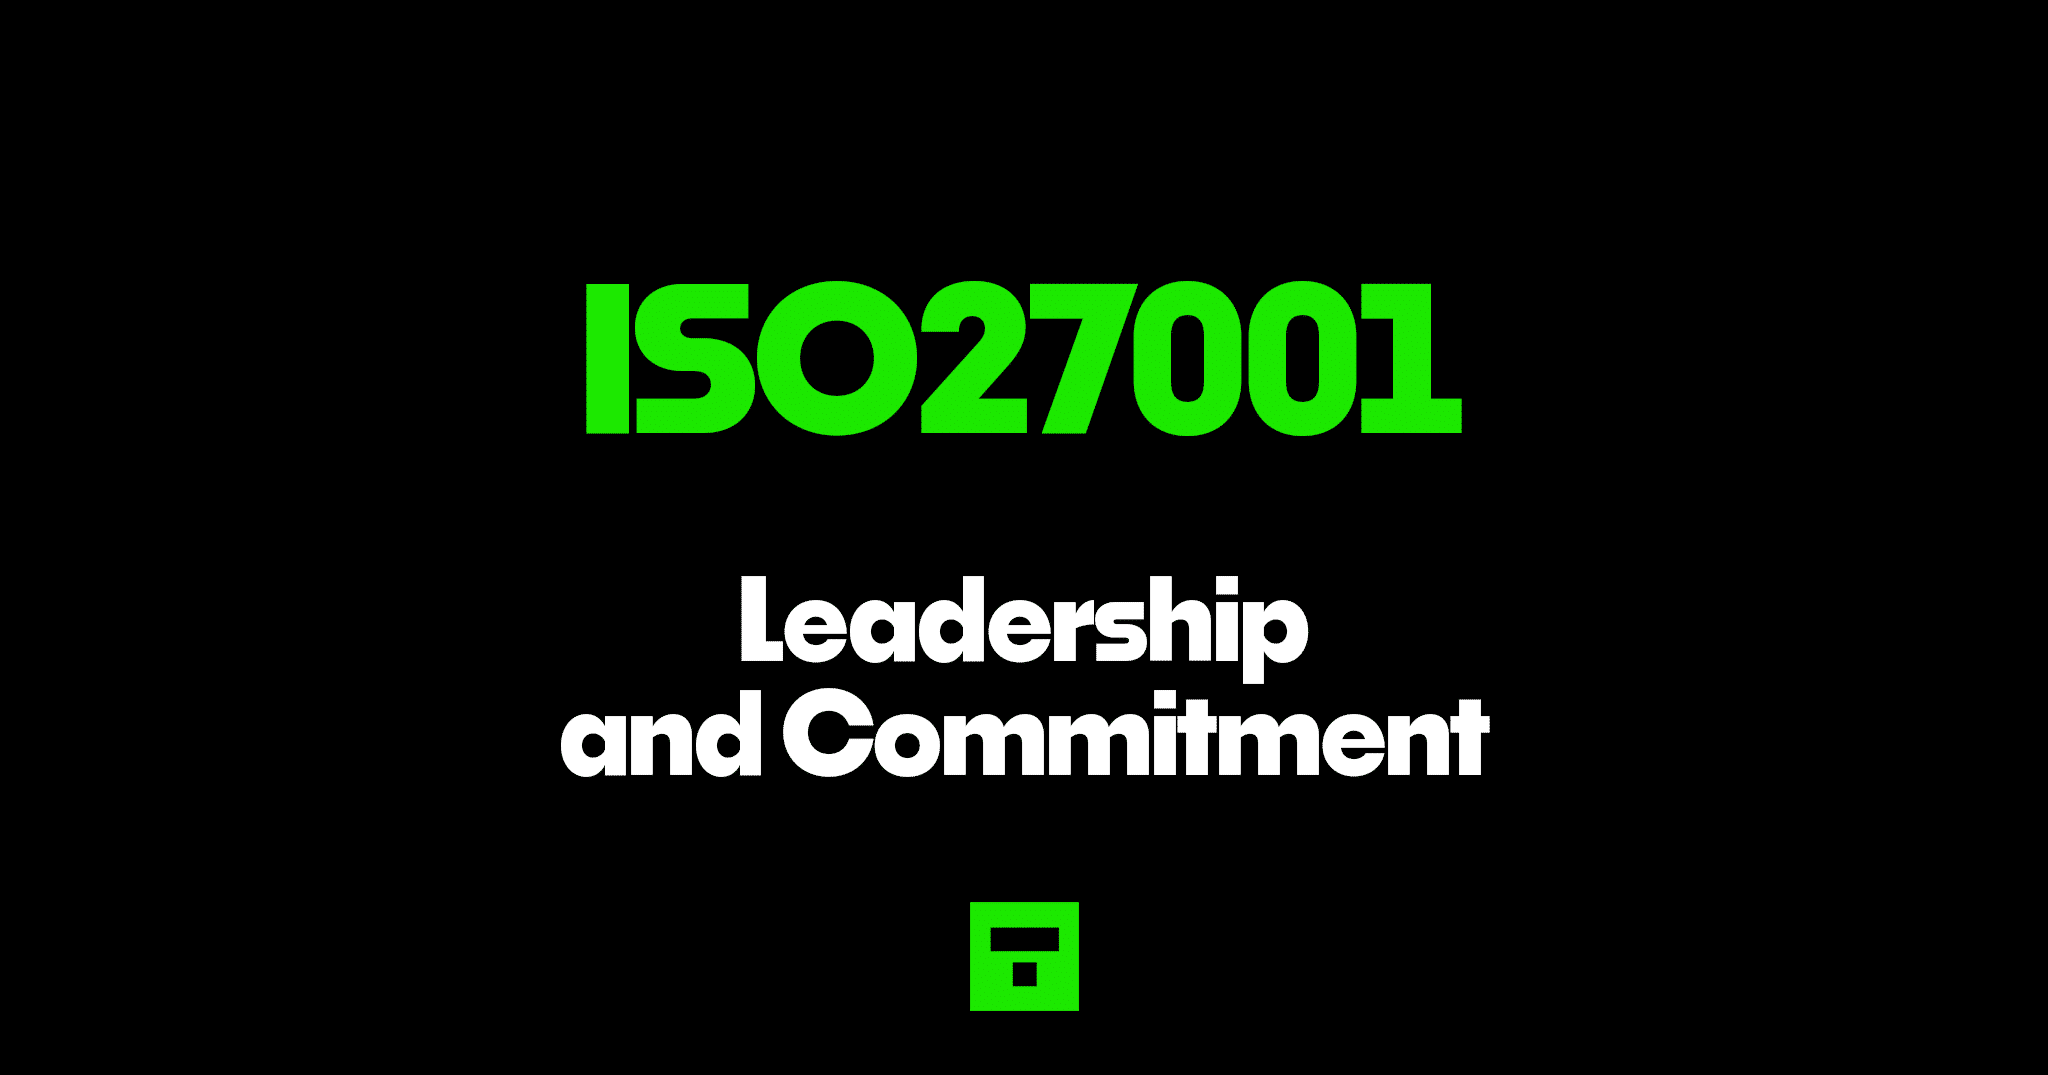 ISO27001 Leadership and Commitment